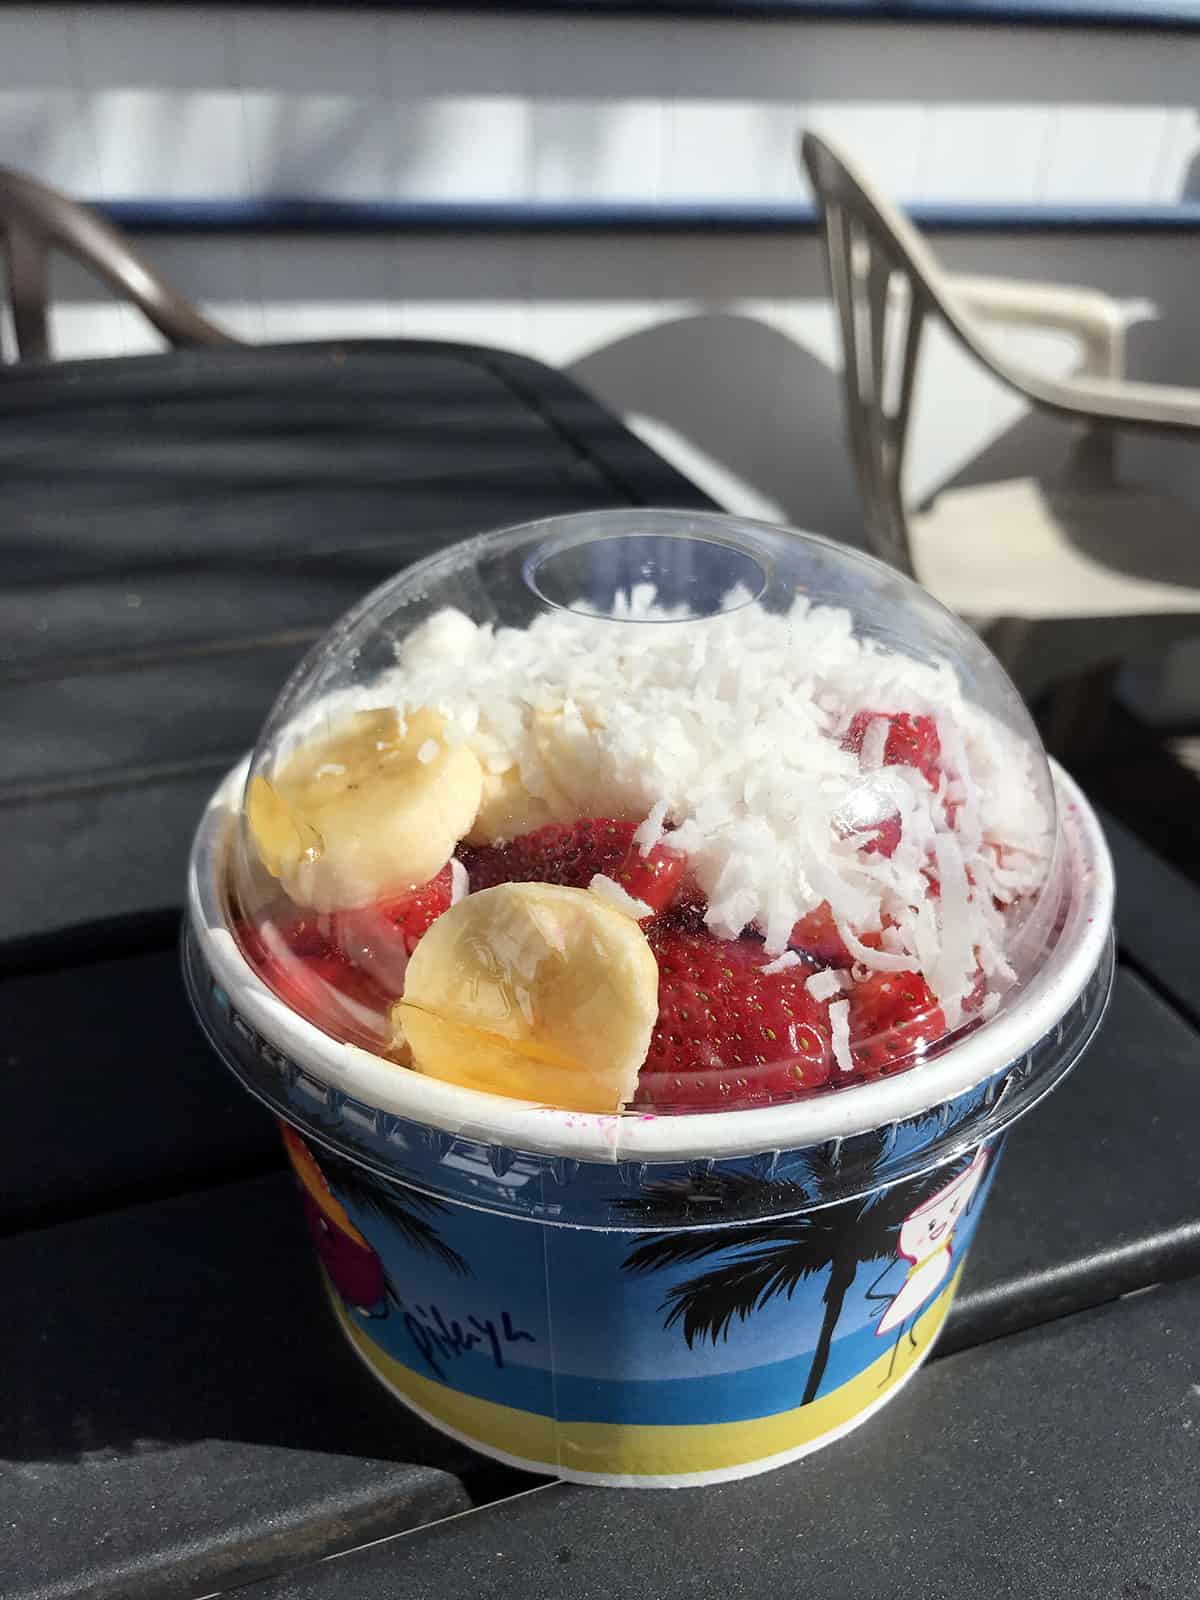 Acai bowl from Crownpoint coffee in San Diego